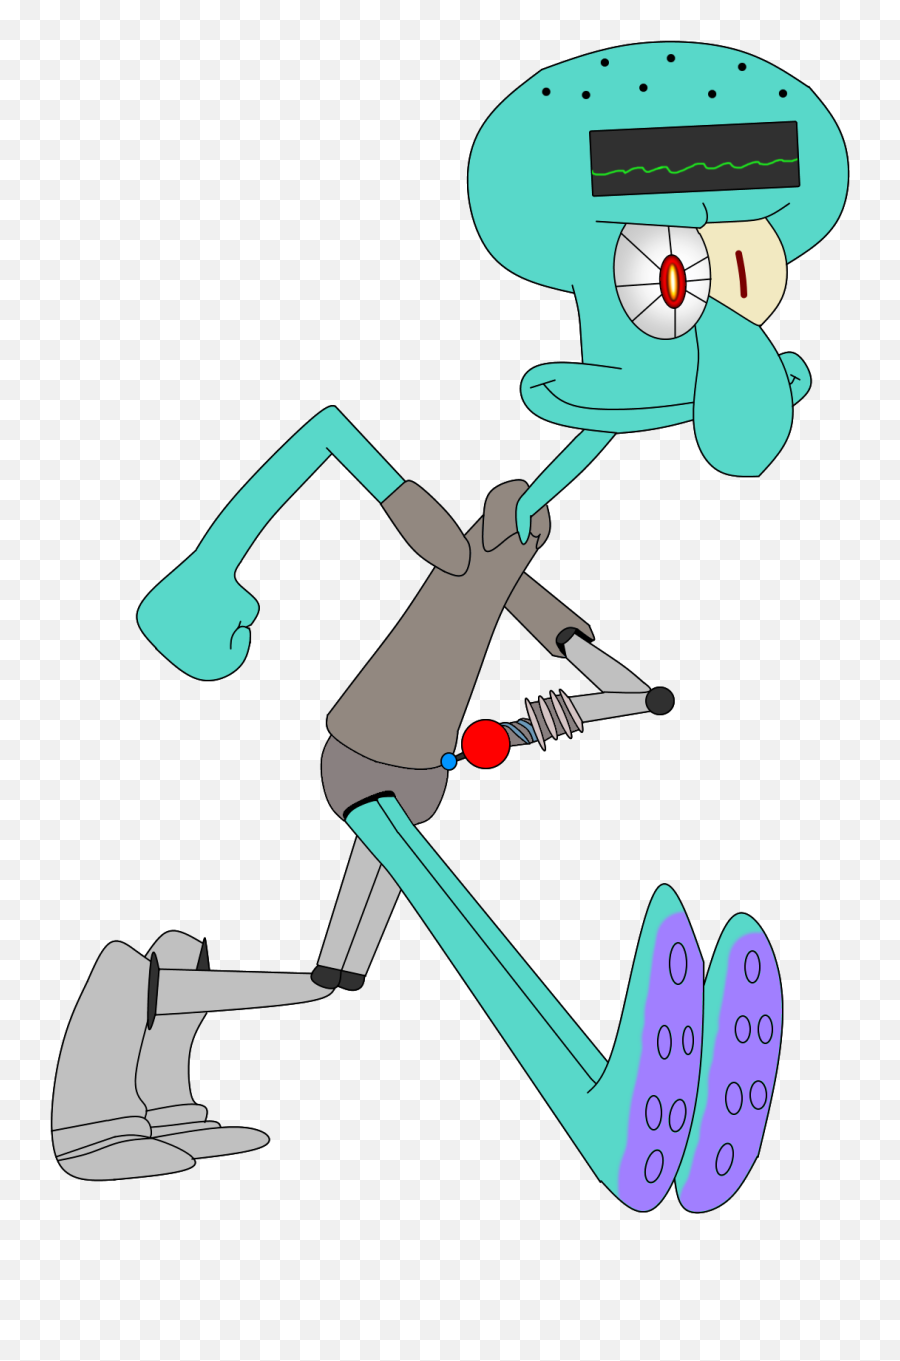 2039 Squidward - Squidward And Spongebob Silhouette Png,Squidward Png